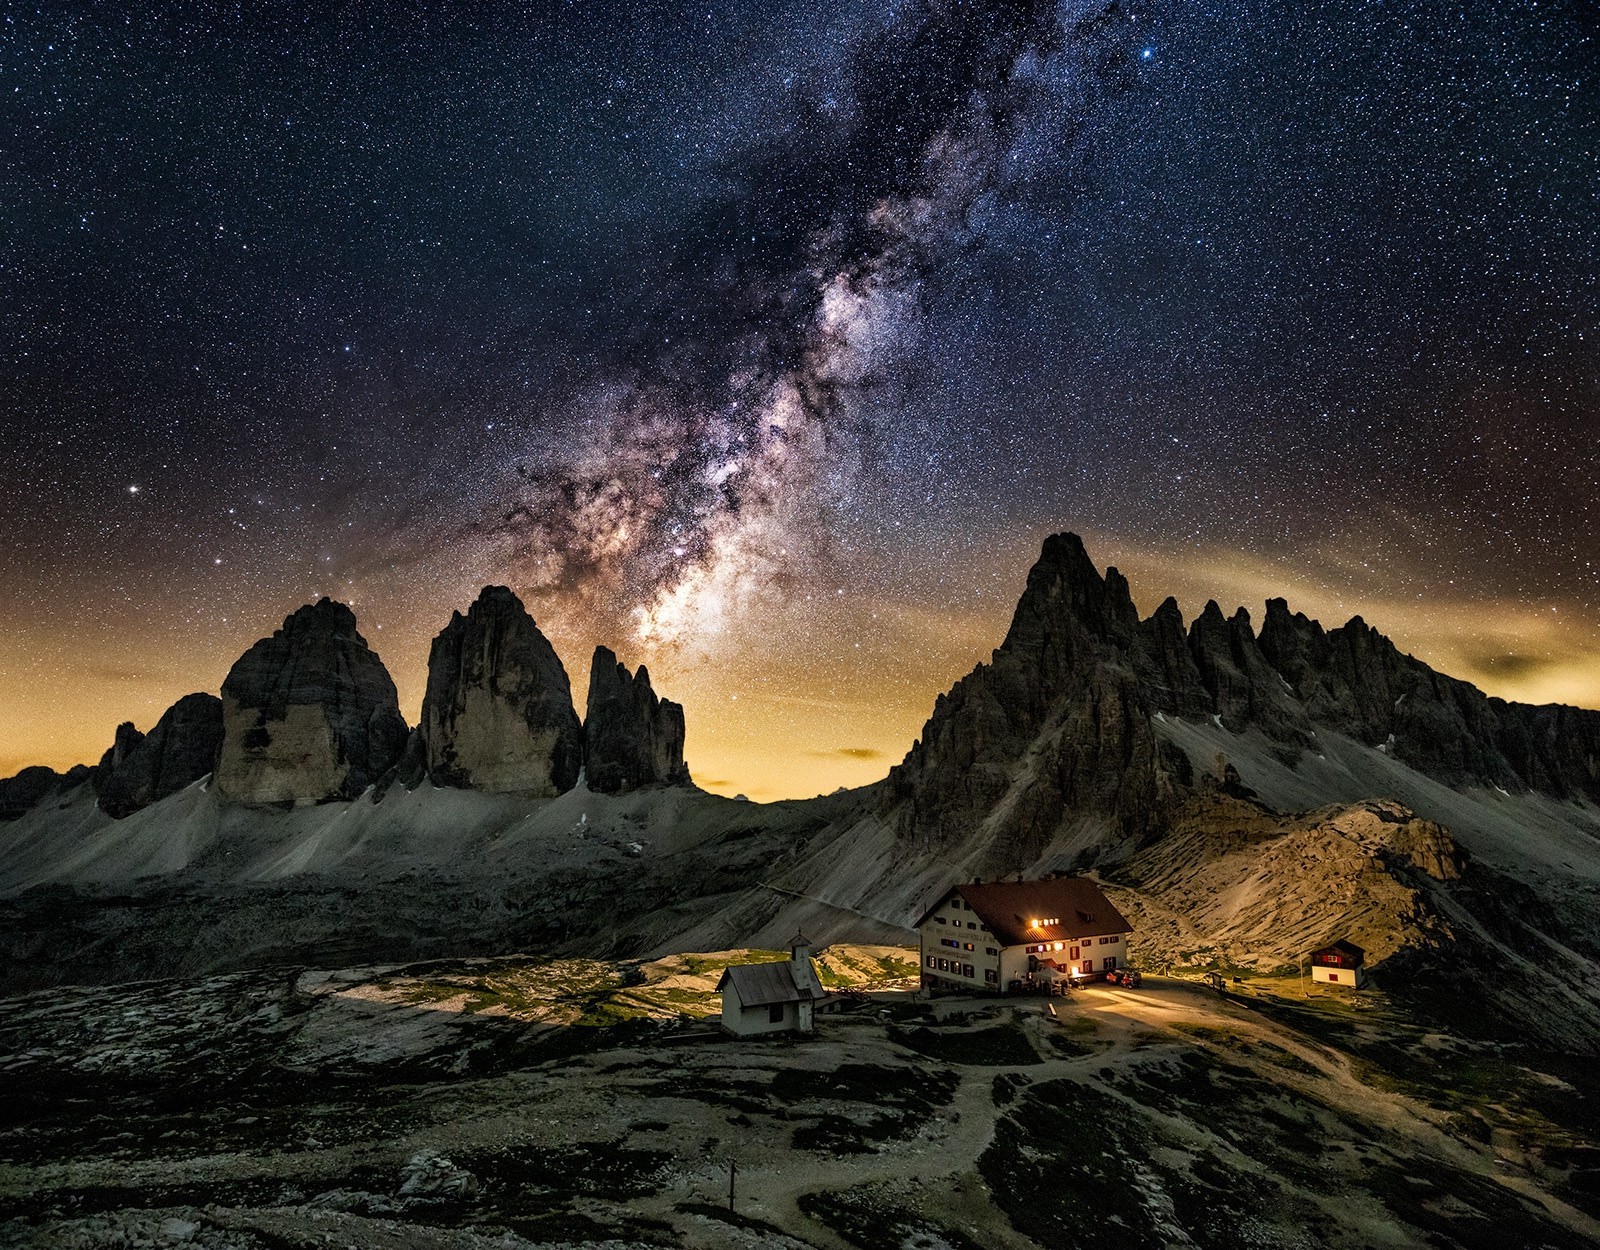 Dolomites Mountains Milky Way Wallpapers